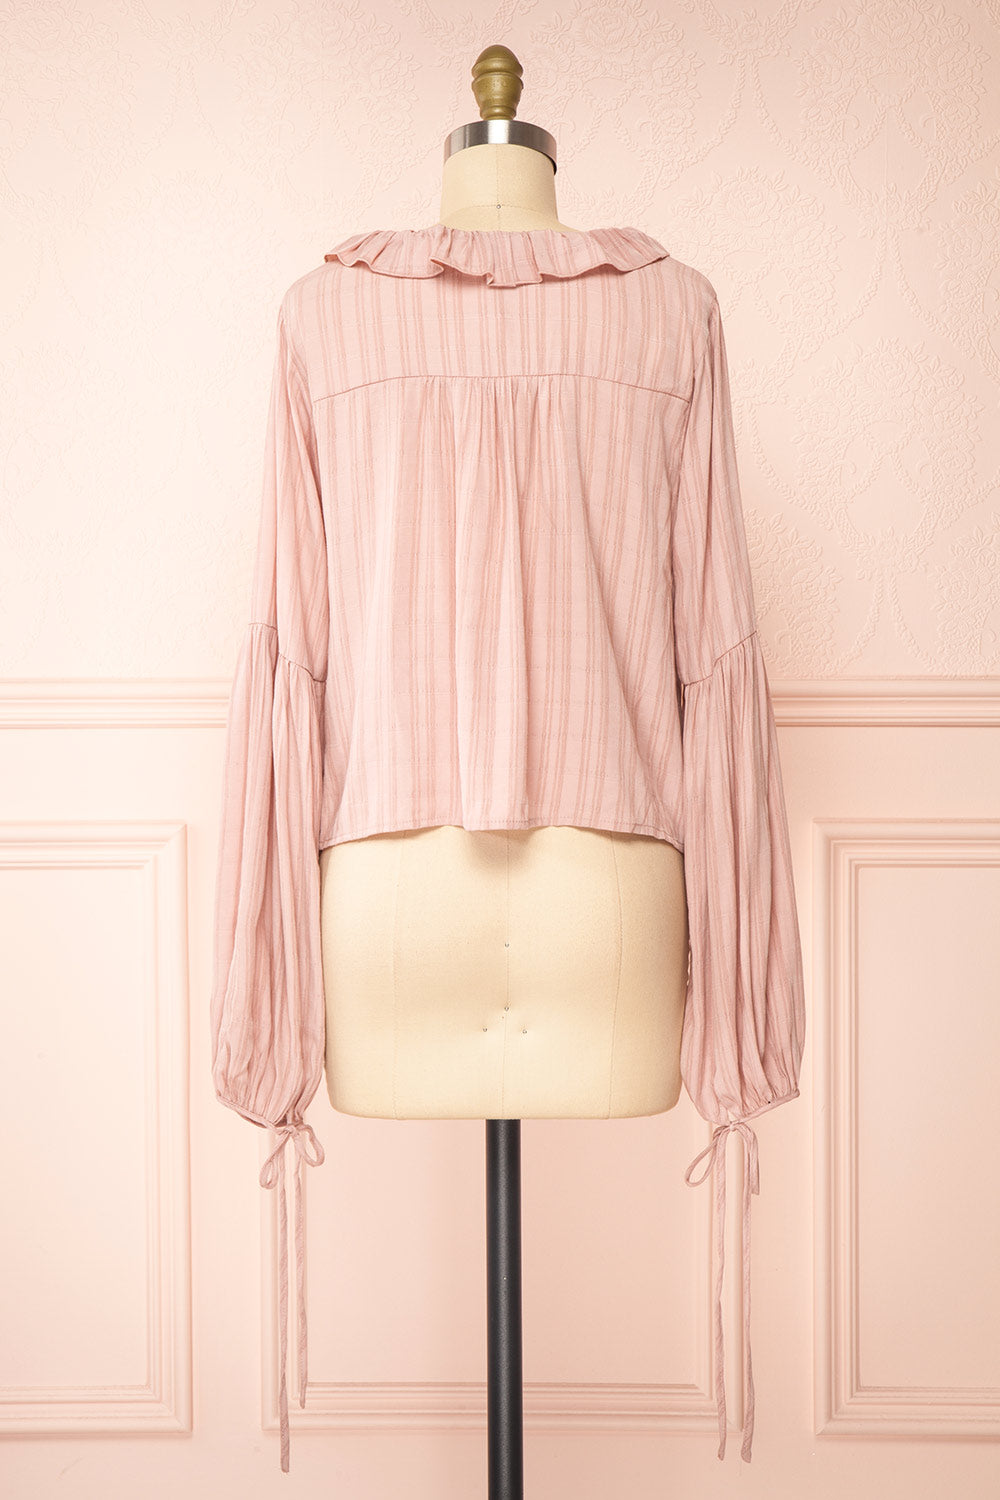 Adorae Pink Long Sleeve Blouse w/ Ruffled Collar | Boutique 1861 back view